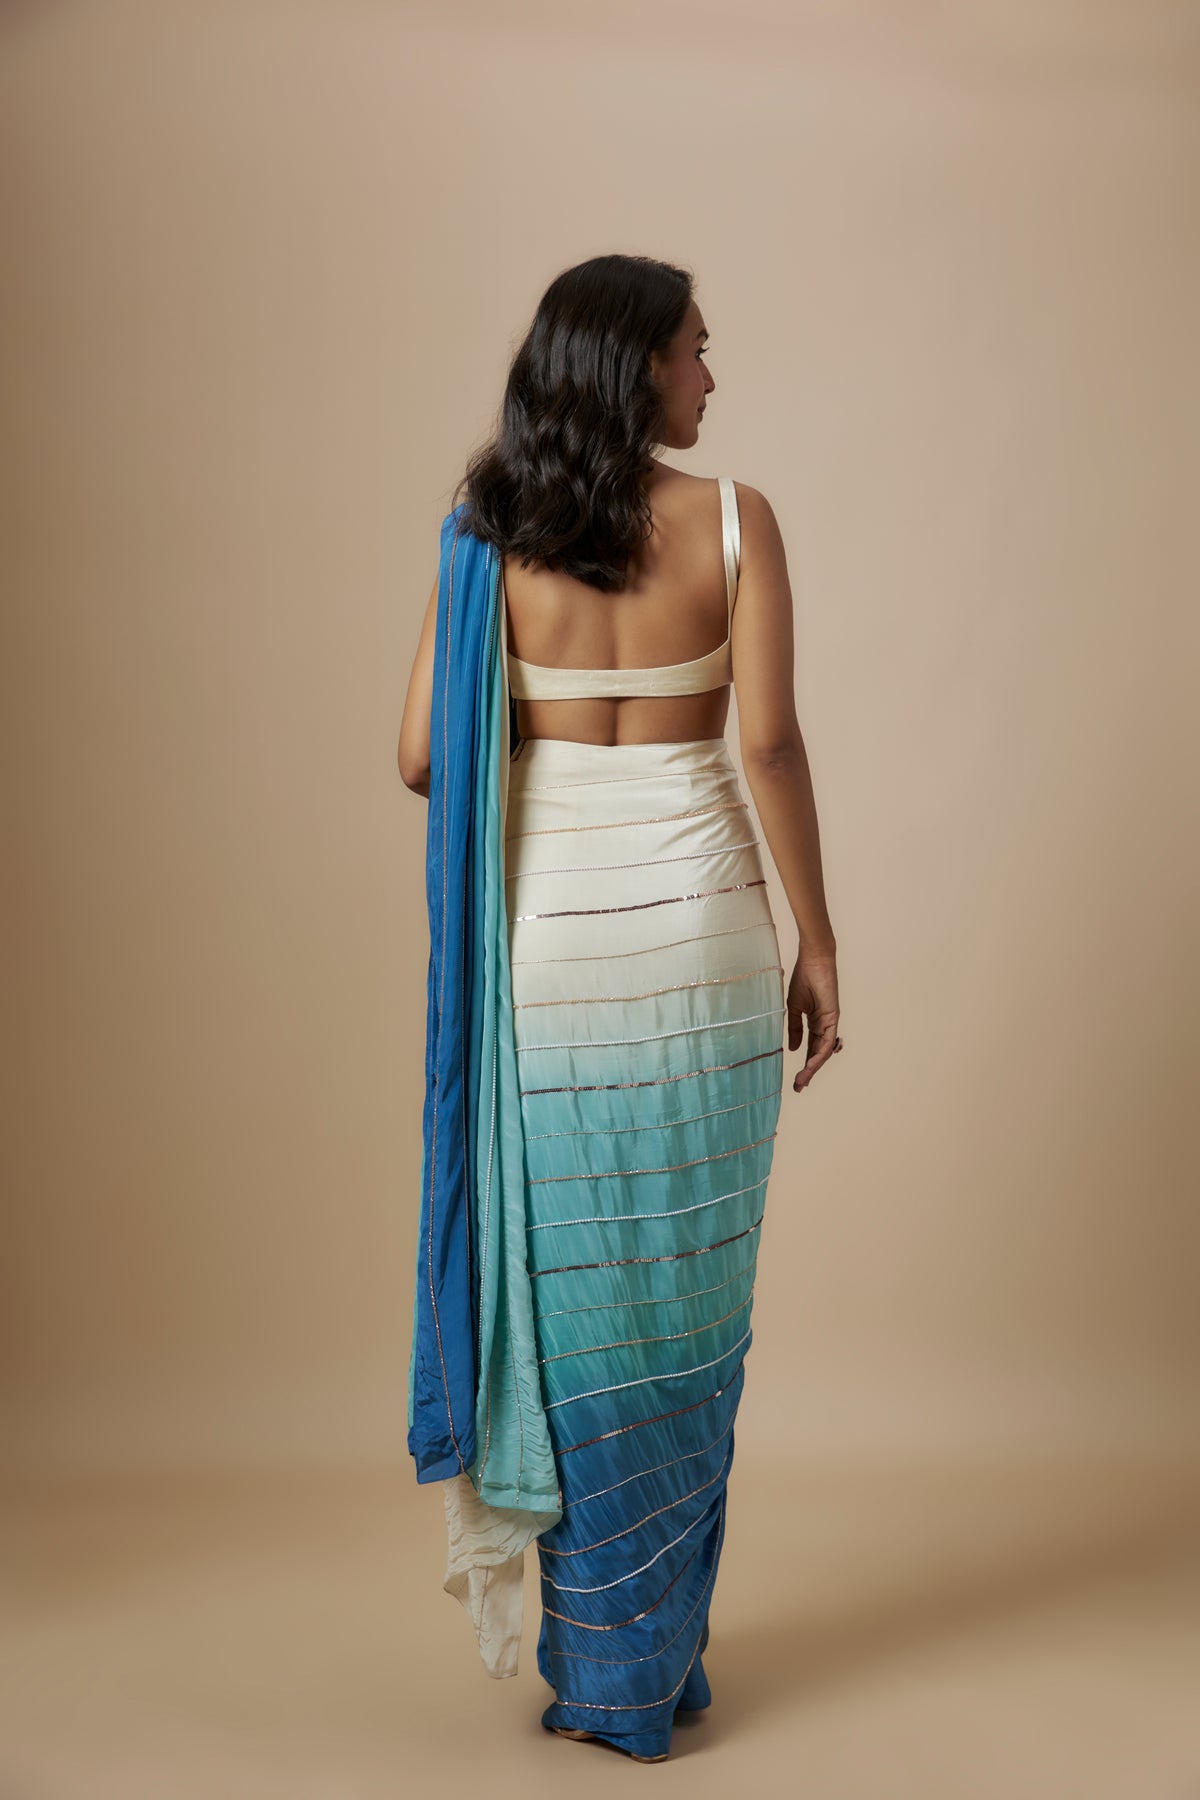 Ombre Embroidered Saree With Blouse